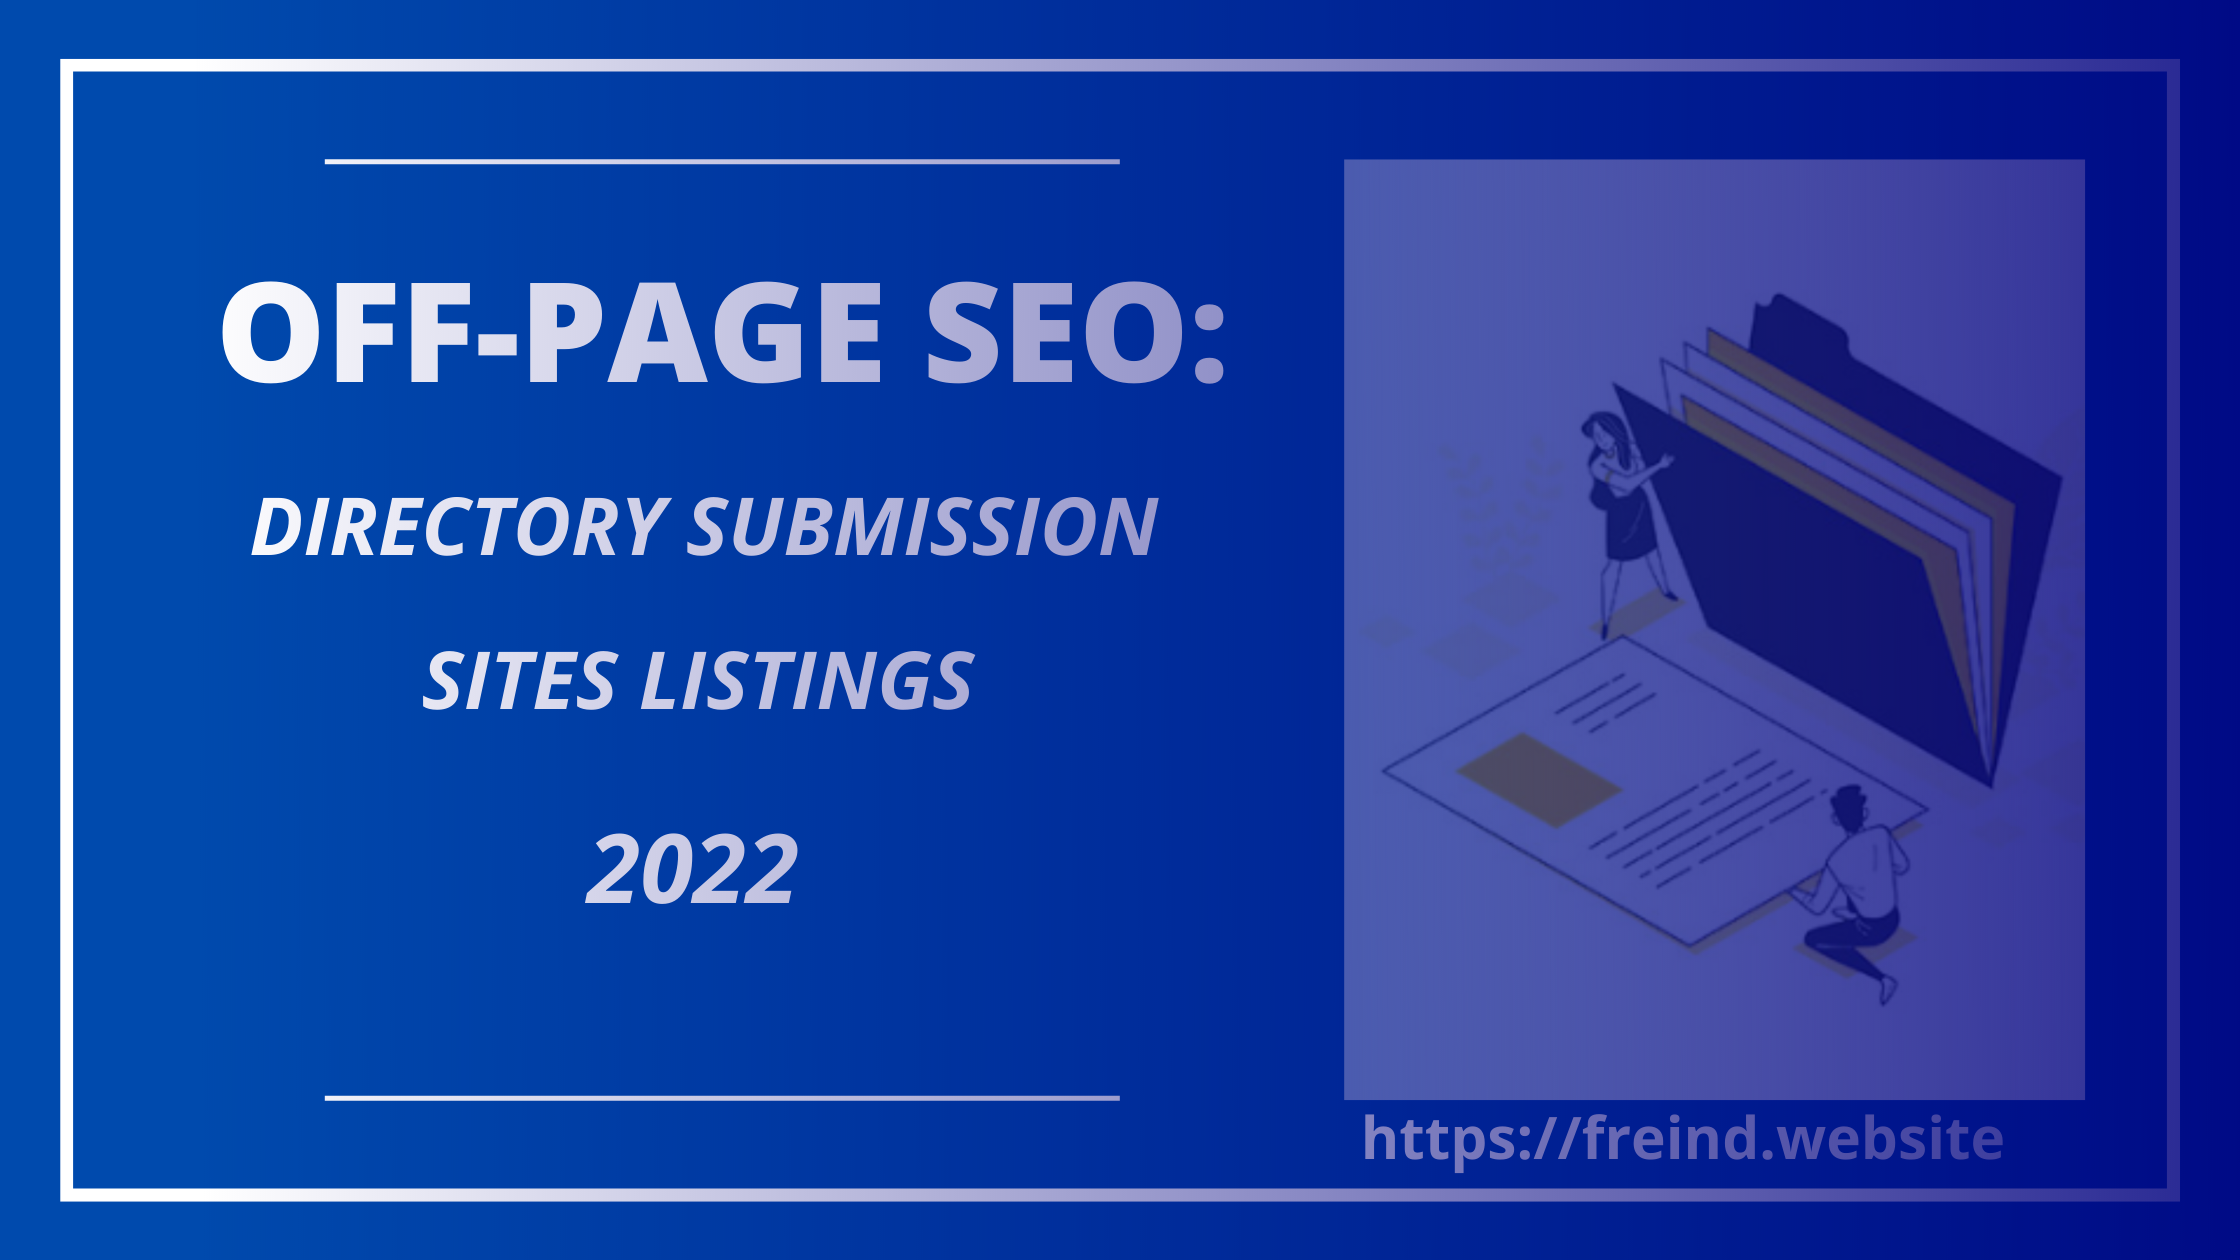 OFF-PAGE SEO: web directory submission 2022/2023